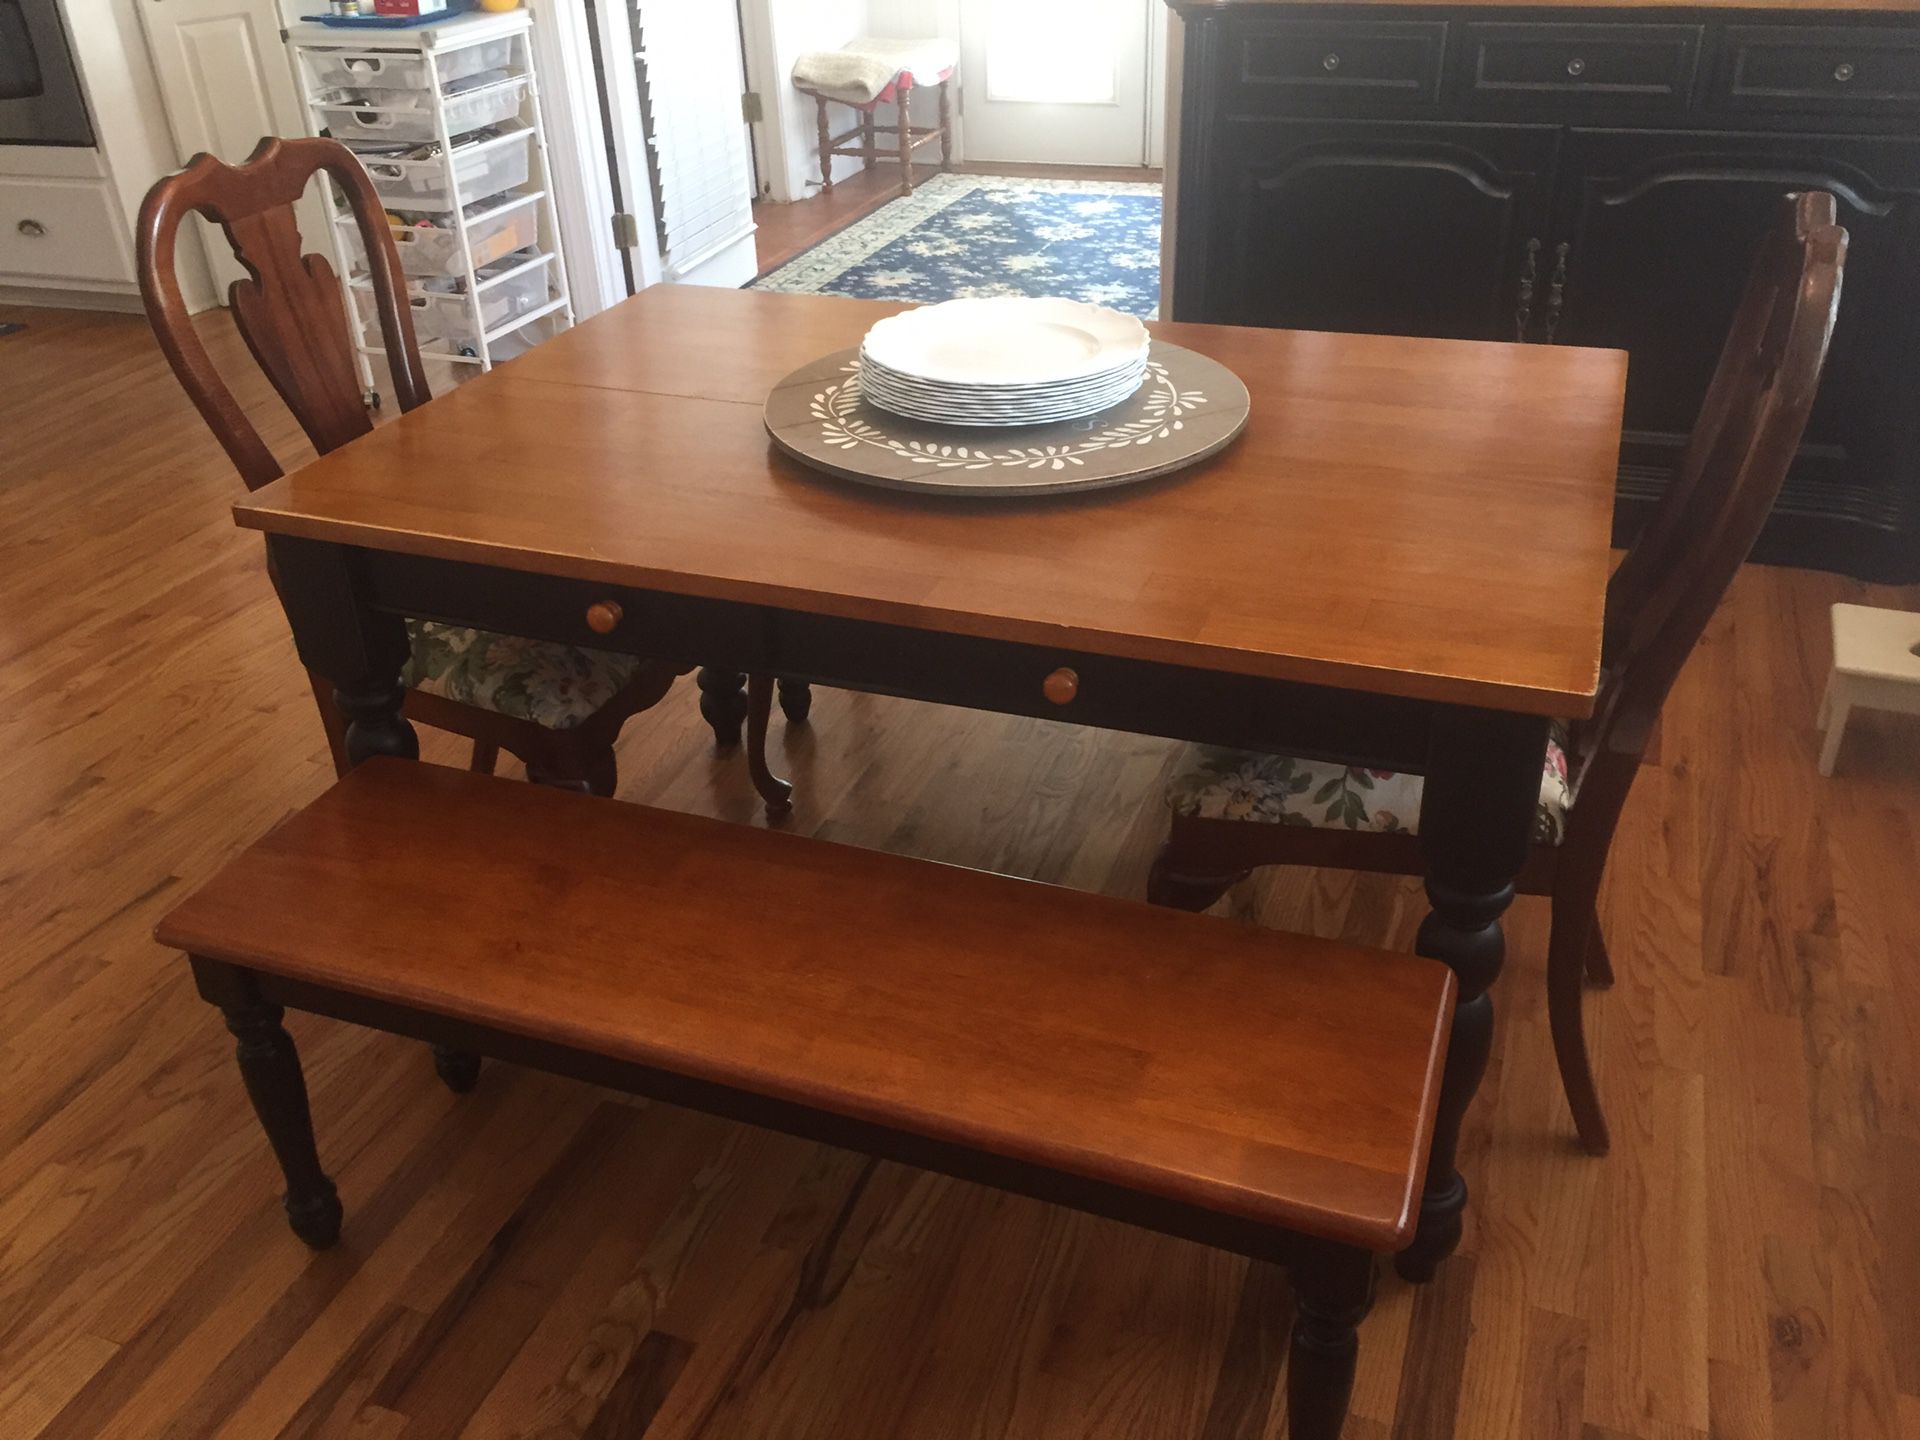 54” kitchen table with 2 chairs, 2 benches, and 1 leaf